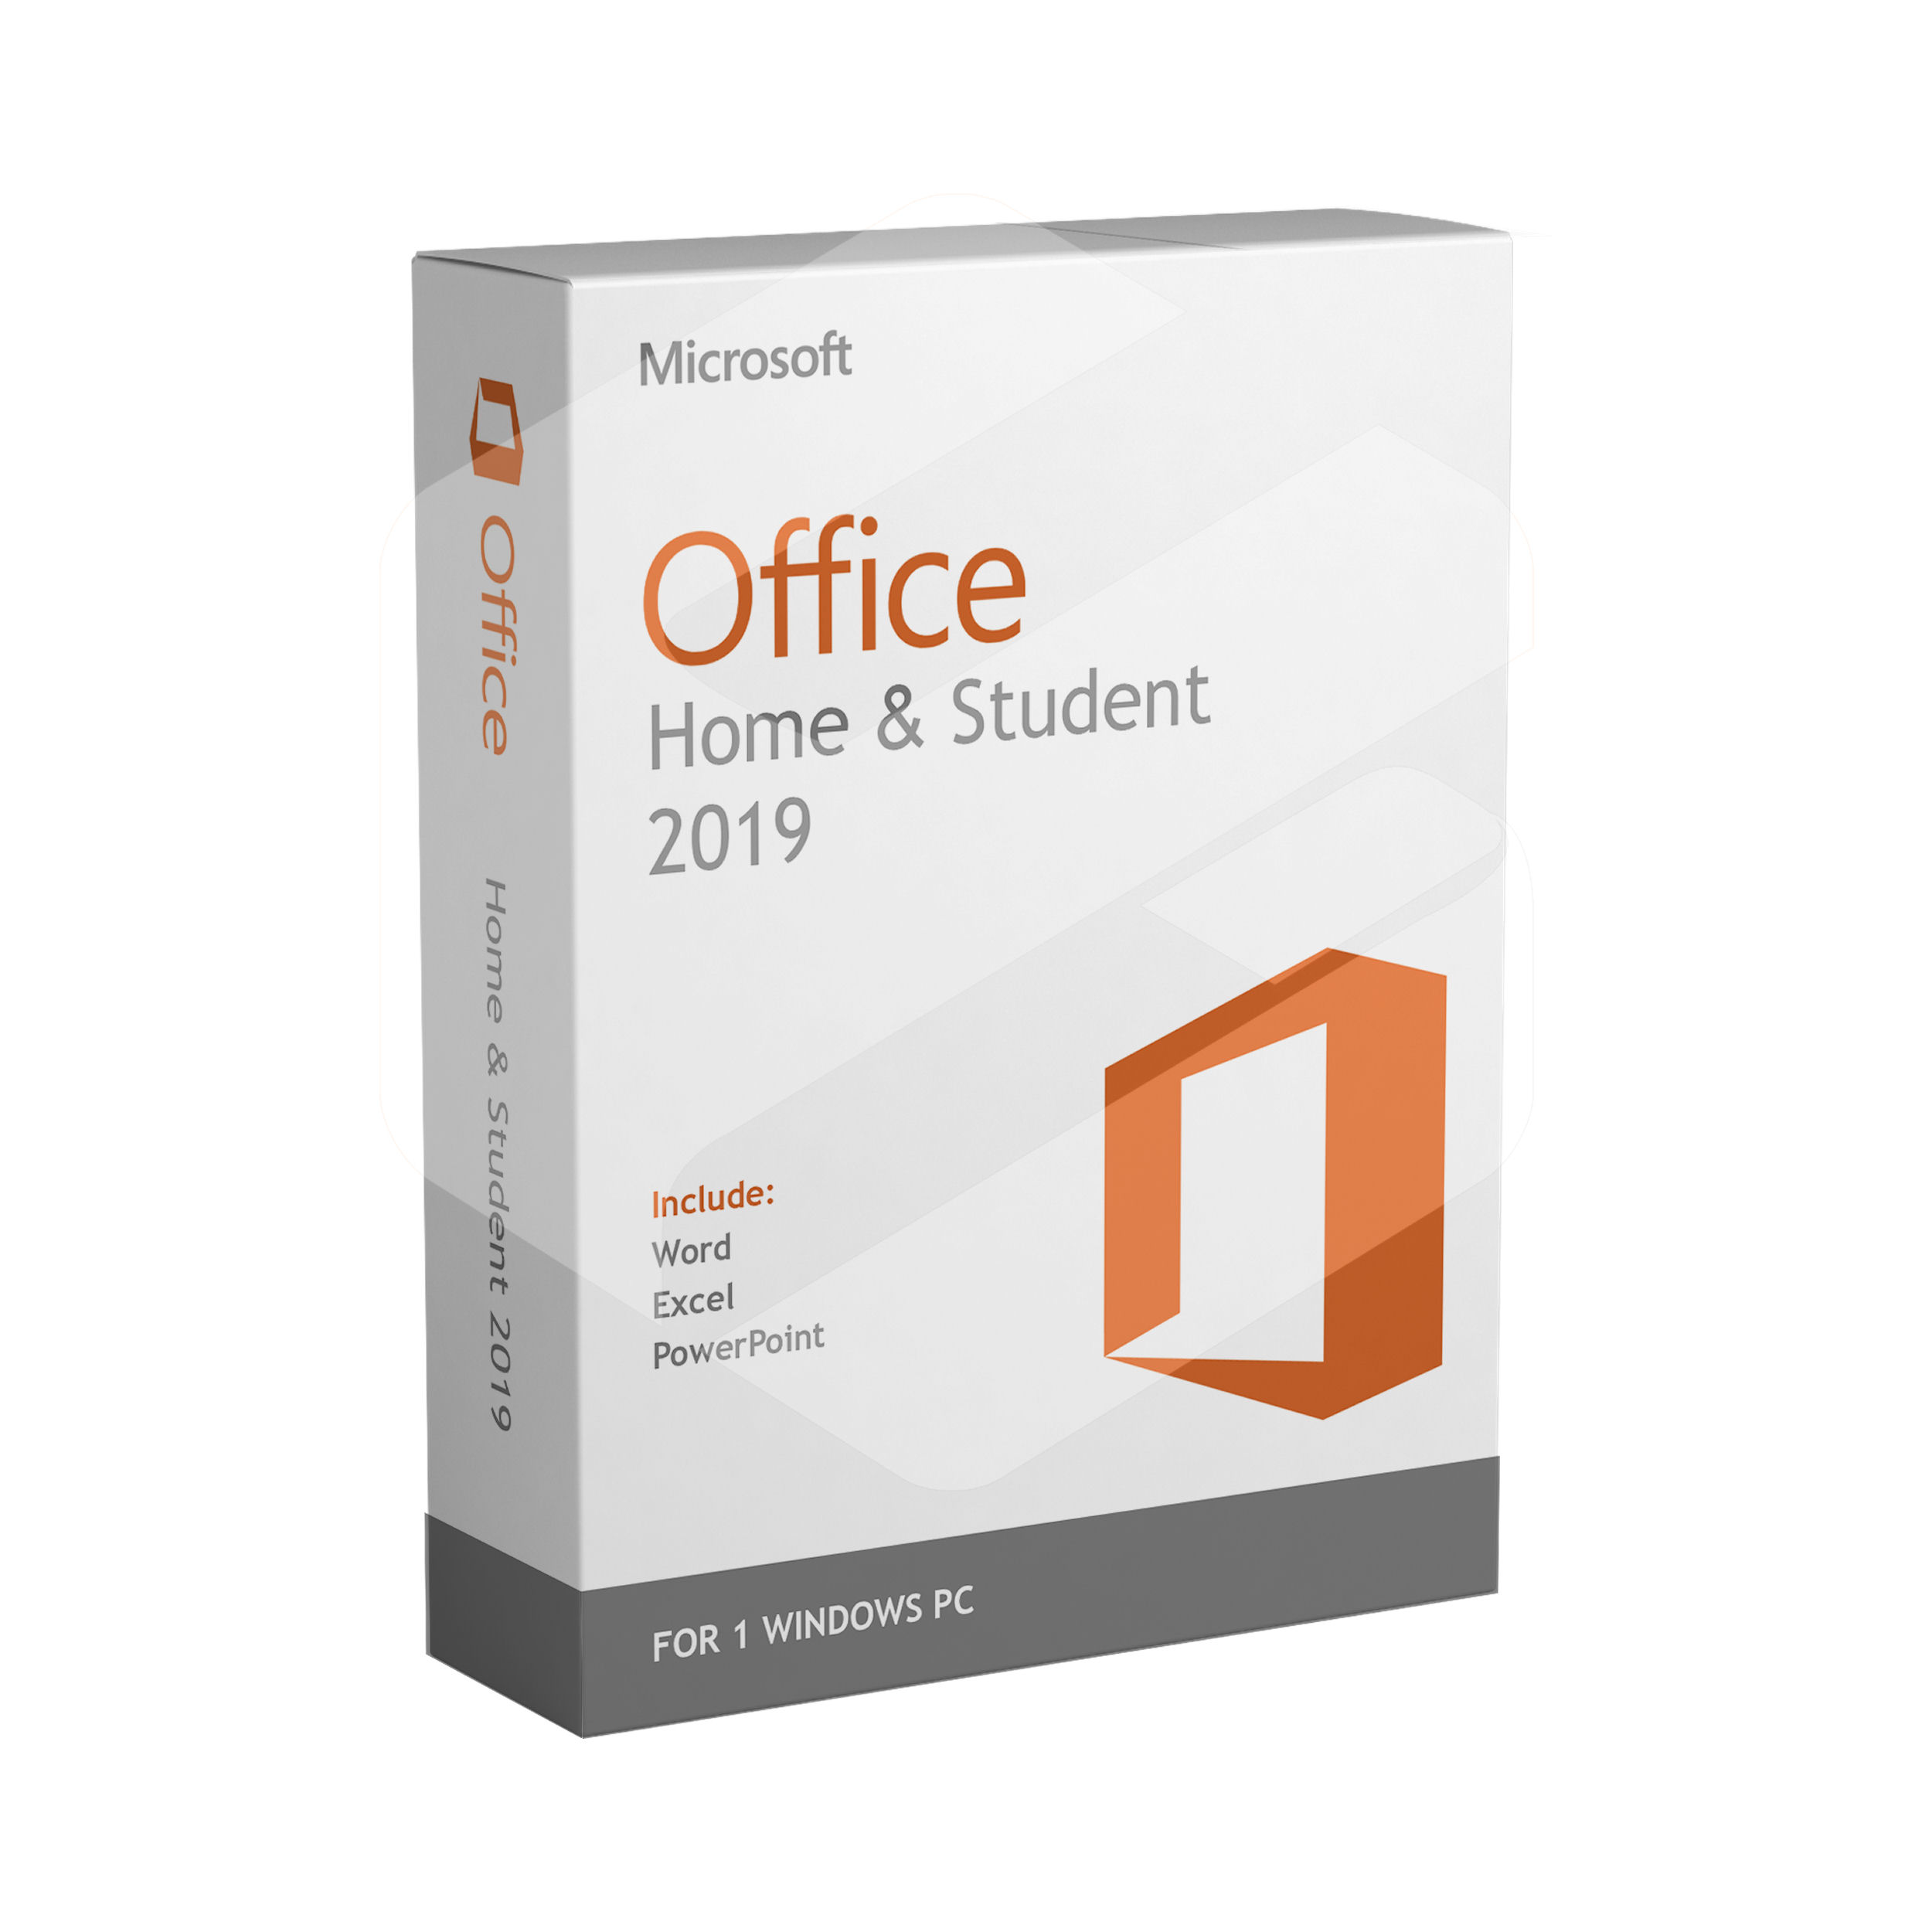 Microsoft Office 2019 Home & Student | SW10198